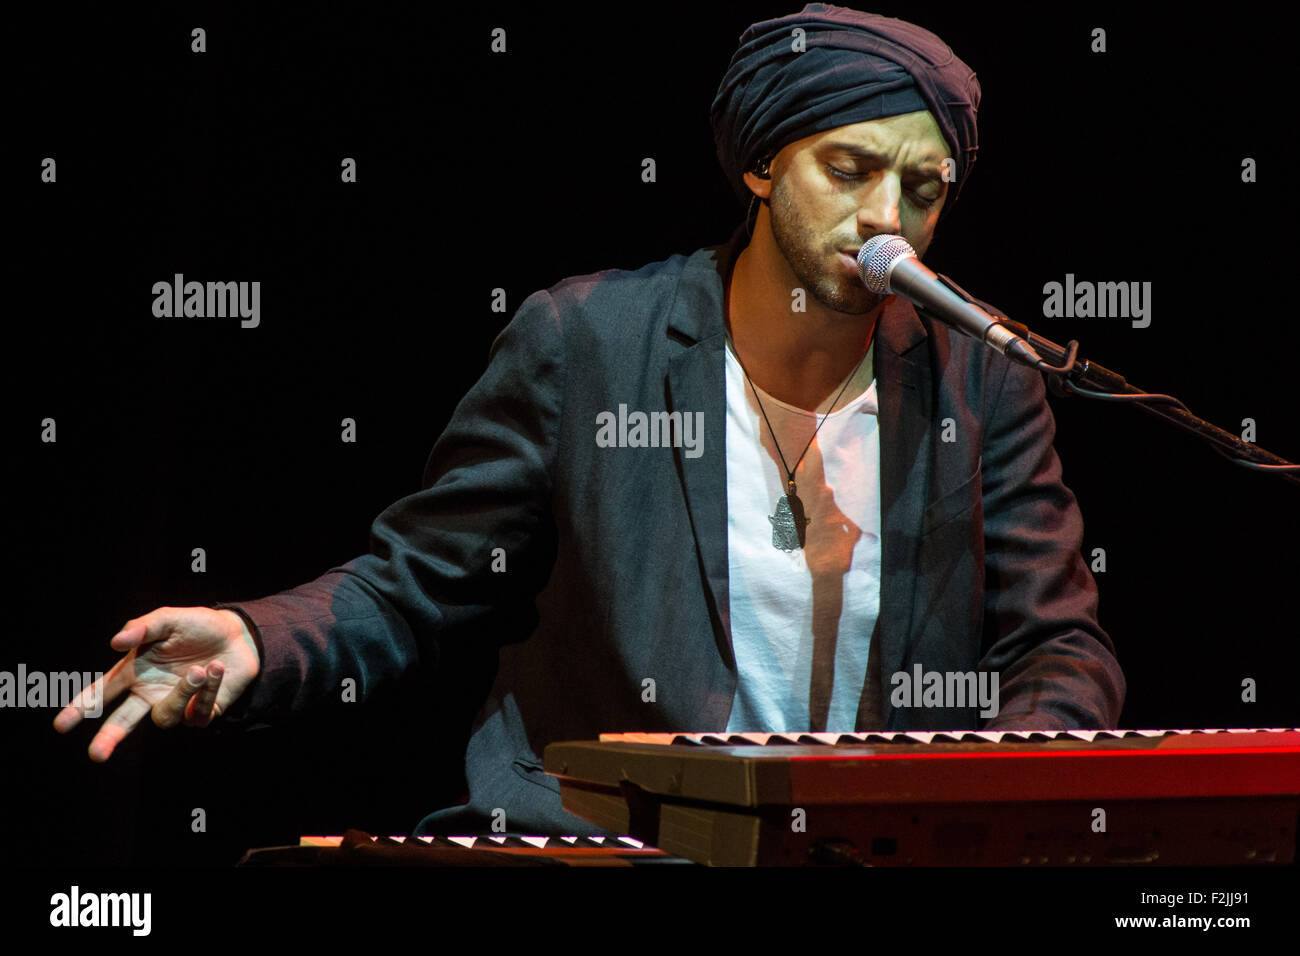 Milan Italy. 19th September 2015. The Israeli singer-songwriter Idan Raichel known for The Idan Raichel Project performs live on stage at Teatro Elfo Puccini during the MITO SettembreMusica Festival 2015 with special guest Italian singer Ornella Vanoni Credit:  Rodolfo Sassano/Alamy Live News Stock Photo